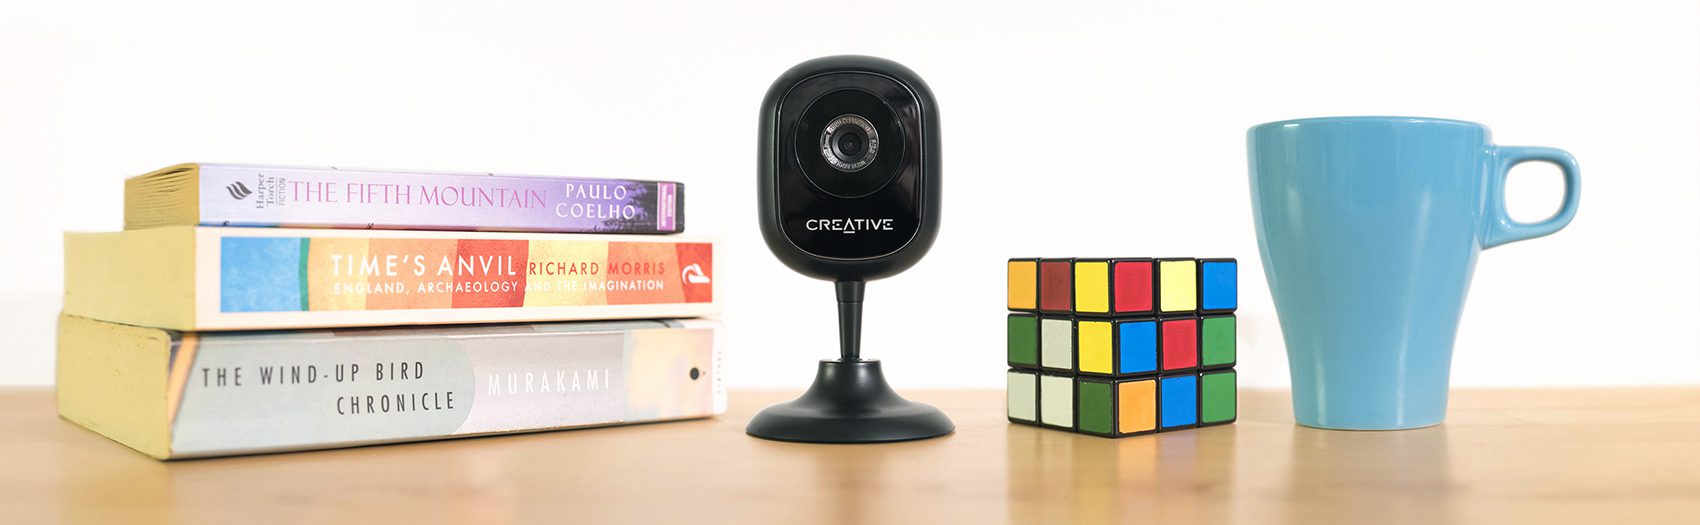 Creative Live! Cam IP SmartHD review